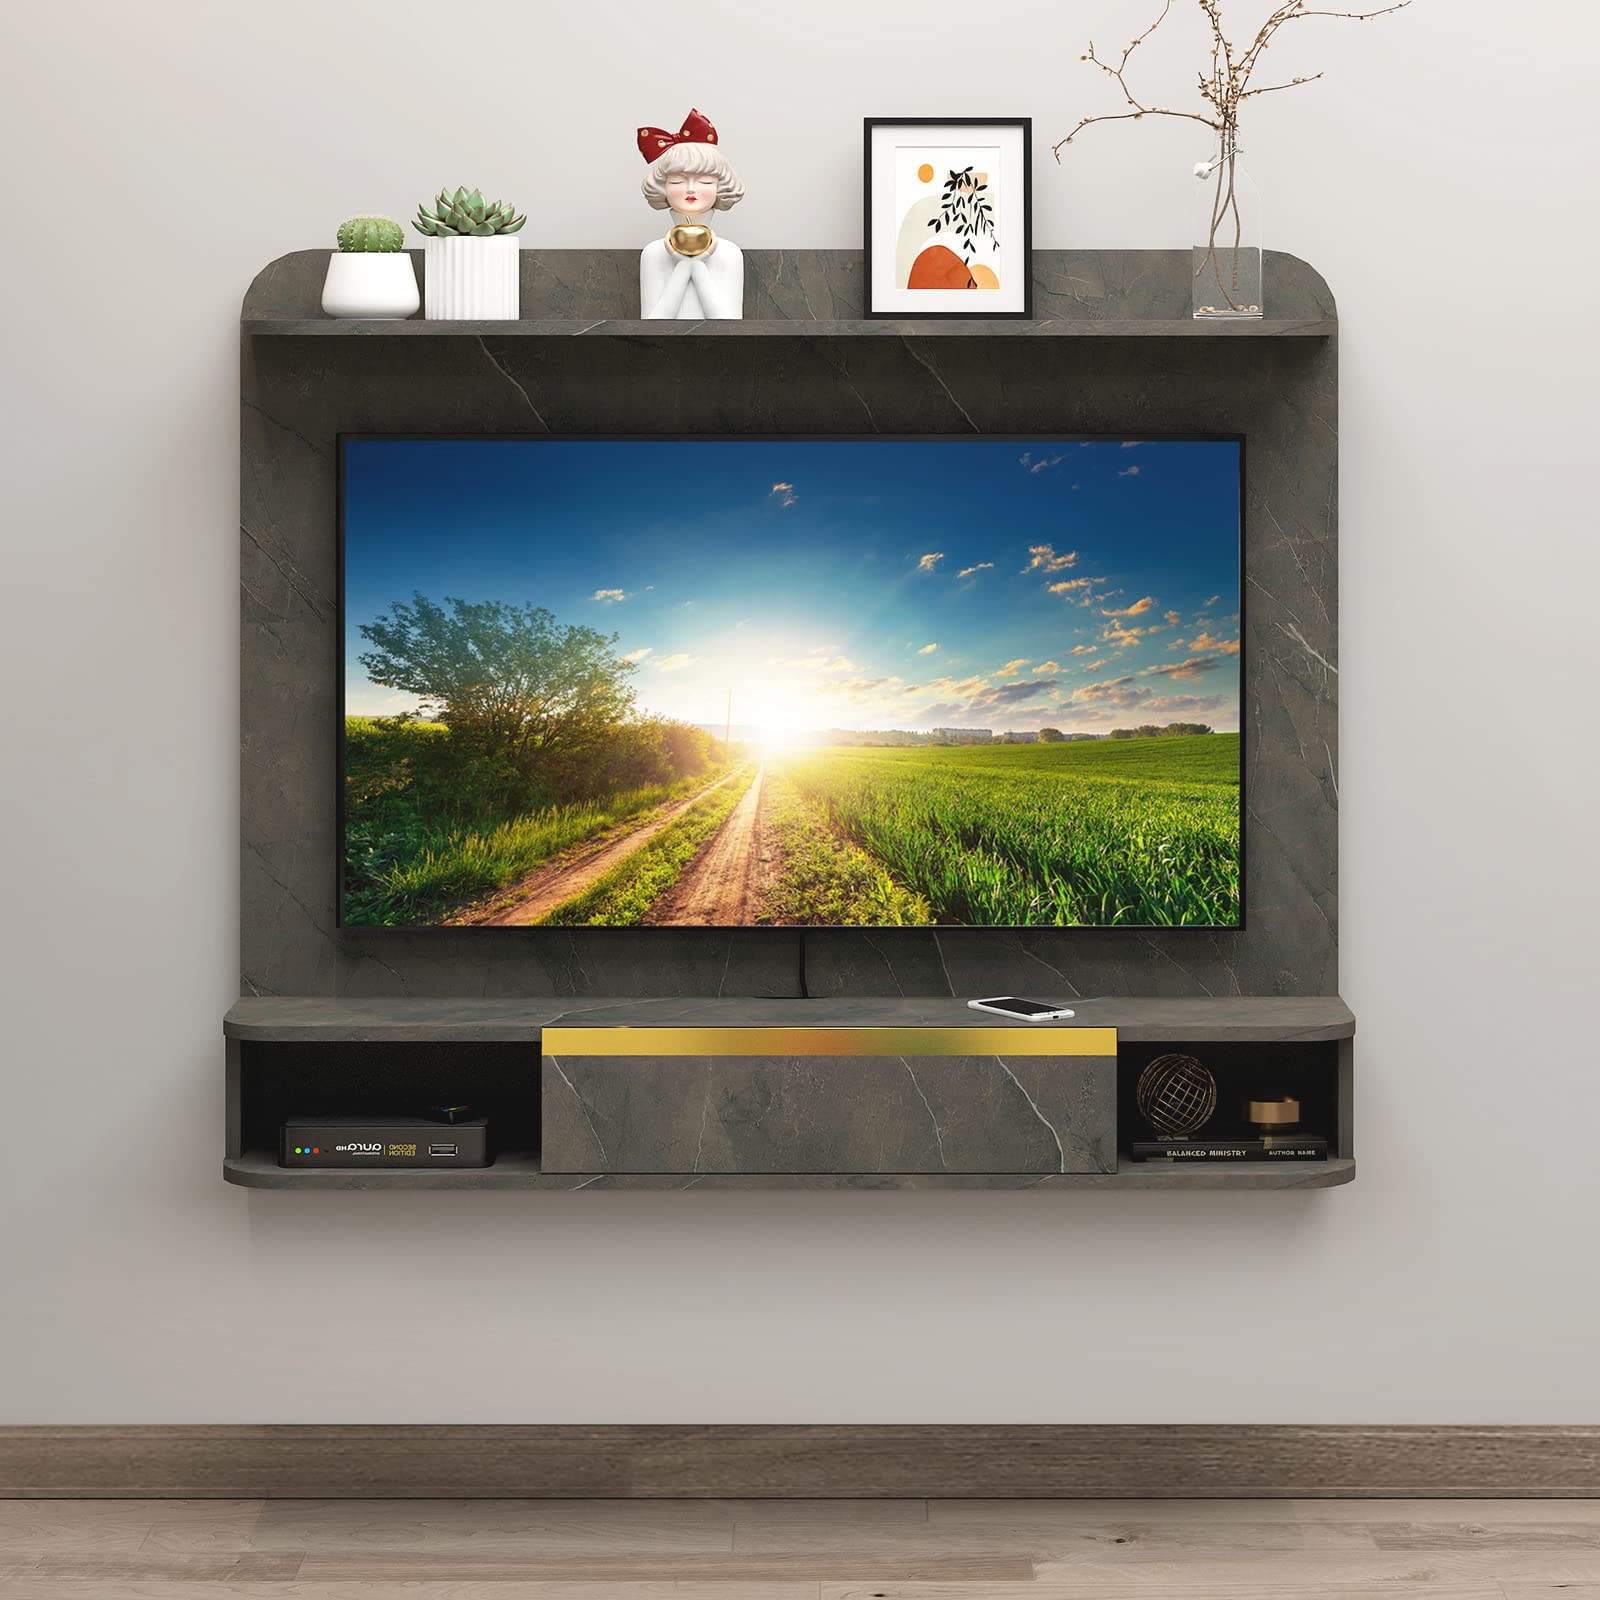 47.63" Dark Grey Floating TV Stand with Wall Panel for 32"- 50" TVs